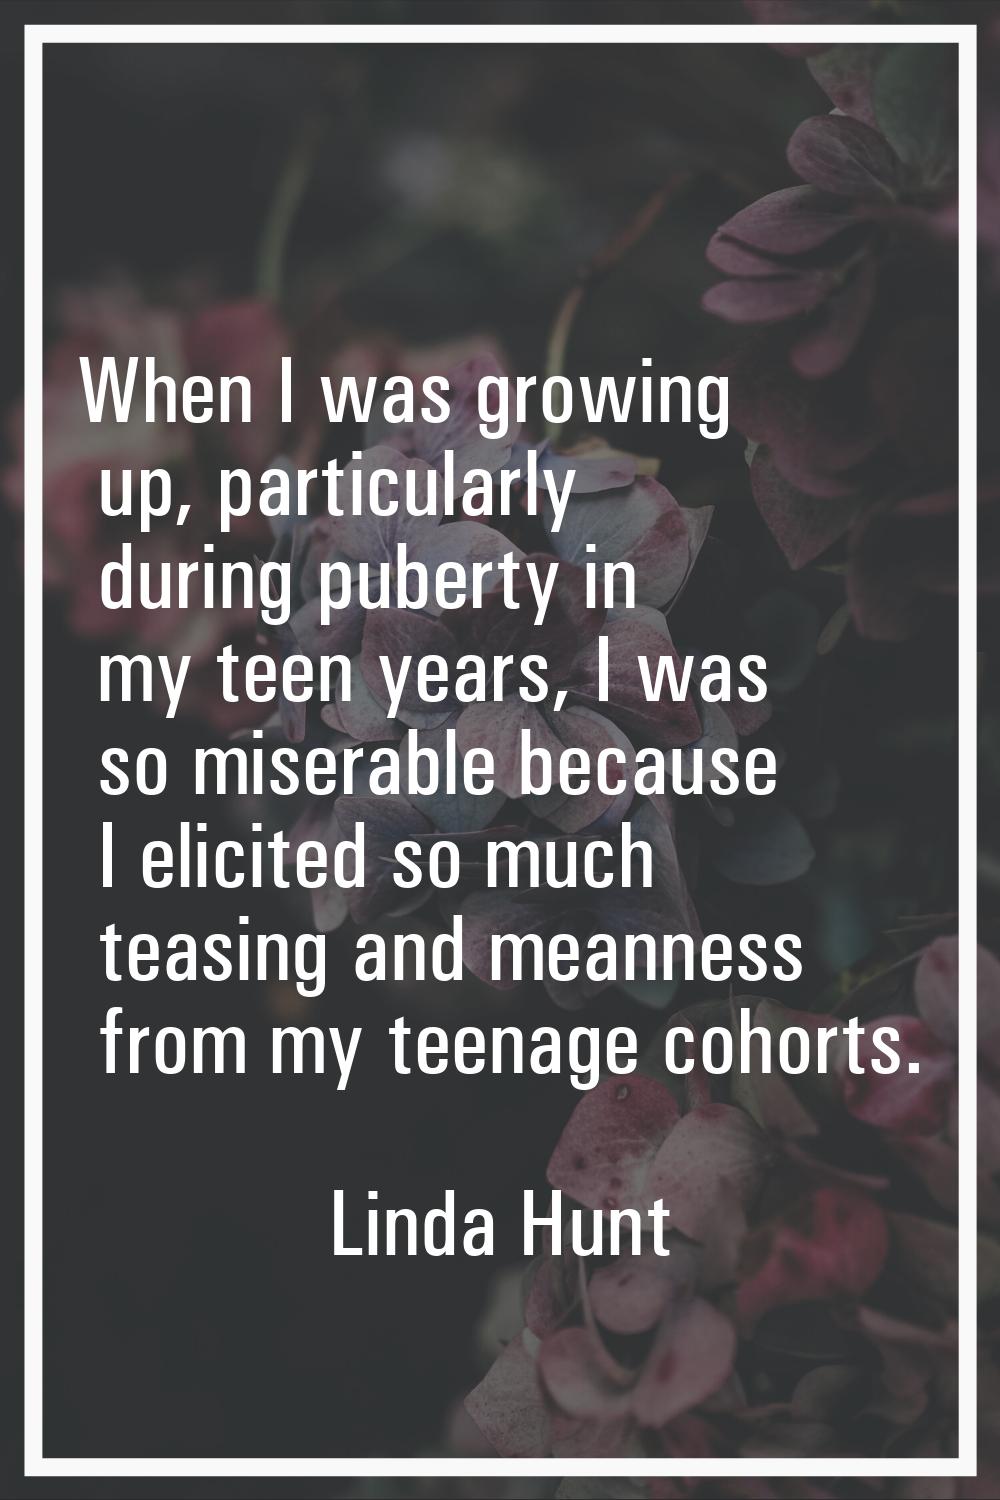 When I was growing up, particularly during puberty in my teen years, I was so miserable because I e